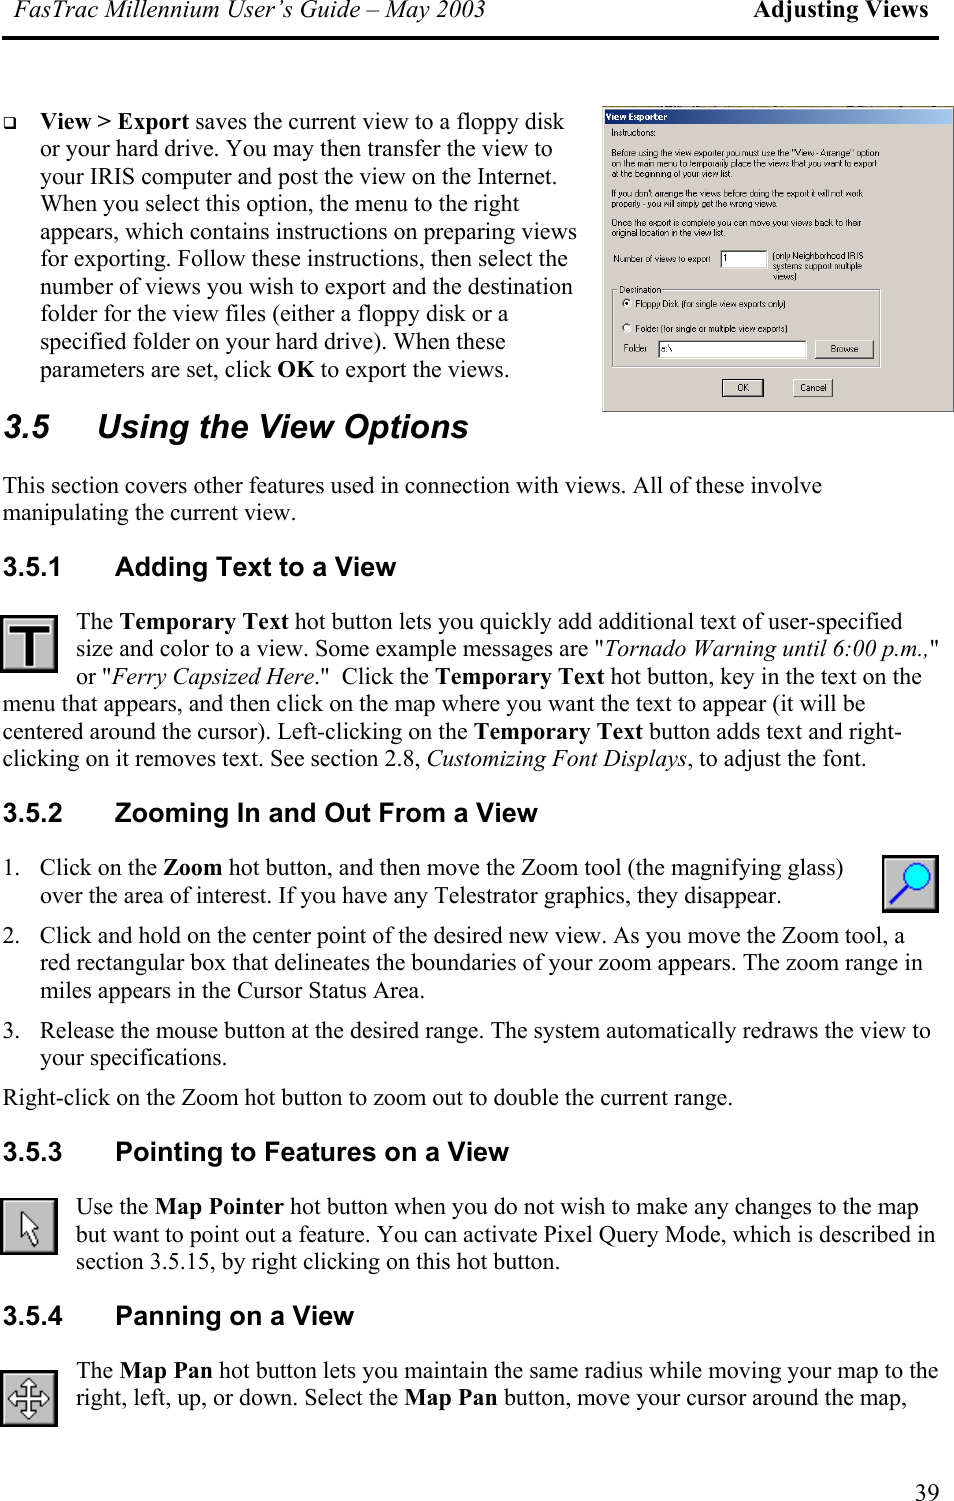 FasTrac Millennium User’s Guide – May 2003 Adjusting Views   View &gt; Export saves the current view to a floppy disk or your hard drive. You may then transfer the view to your IRIS computer and post the view on the Internet. When you select this option, the menu to the right appears, which contains instructions on preparing views for exporting. Follow these instructions, then select the number of views you wish to export and the destination folder for the view files (either a floppy disk or a specified folder on your hard drive). When these parameters are set, click OK to export the views. 3.5  Using the View Options This section covers other features used in connection with views. All of these involve manipulating the current view. 3.5.1  Adding Text to a View The Temporary Text hot button lets you quickly add additional text of user-specified size and color to a view. Some example messages are &quot;Tornado Warning until 6:00 p.m.,&quot; or &quot;Ferry Capsized Here.&quot;  Click the Temporary Text hot button, key in the text on the menu that appears, and then click on the map where you want the text to appear (it will be centered around the cursor). Left-clicking on the Temporary Text button adds text and right-clicking on it removes text. See section 2.8, Customizing Font Displays, to adjust the font. 3.5.2  Zooming In and Out From a View 1.  Click on the Zoom hot button, and then move the Zoom tool (the magnifying glass) over the area of interest. If you have any Telestrator graphics, they disappear. 2.  Click and hold on the center point of the desired new view. As you move the Zoom tool, a red rectangular box that delineates the boundaries of your zoom appears. The zoom range in miles appears in the Cursor Status Area. 3.  Release the mouse button at the desired range. The system automatically redraws the view to your specifications.  Right-click on the Zoom hot button to zoom out to double the current range. 3.5.3  Pointing to Features on a View Use the Map Pointer hot button when you do not wish to make any changes to the map but want to point out a feature. You can activate Pixel Query Mode, which is described in section 3.5.15, by right clicking on this hot button. 3.5.4  Panning on a View The Map Pan hot button lets you maintain the same radius while moving your map to the right, left, up, or down. Select the Map Pan button, move your cursor around the map, 39 